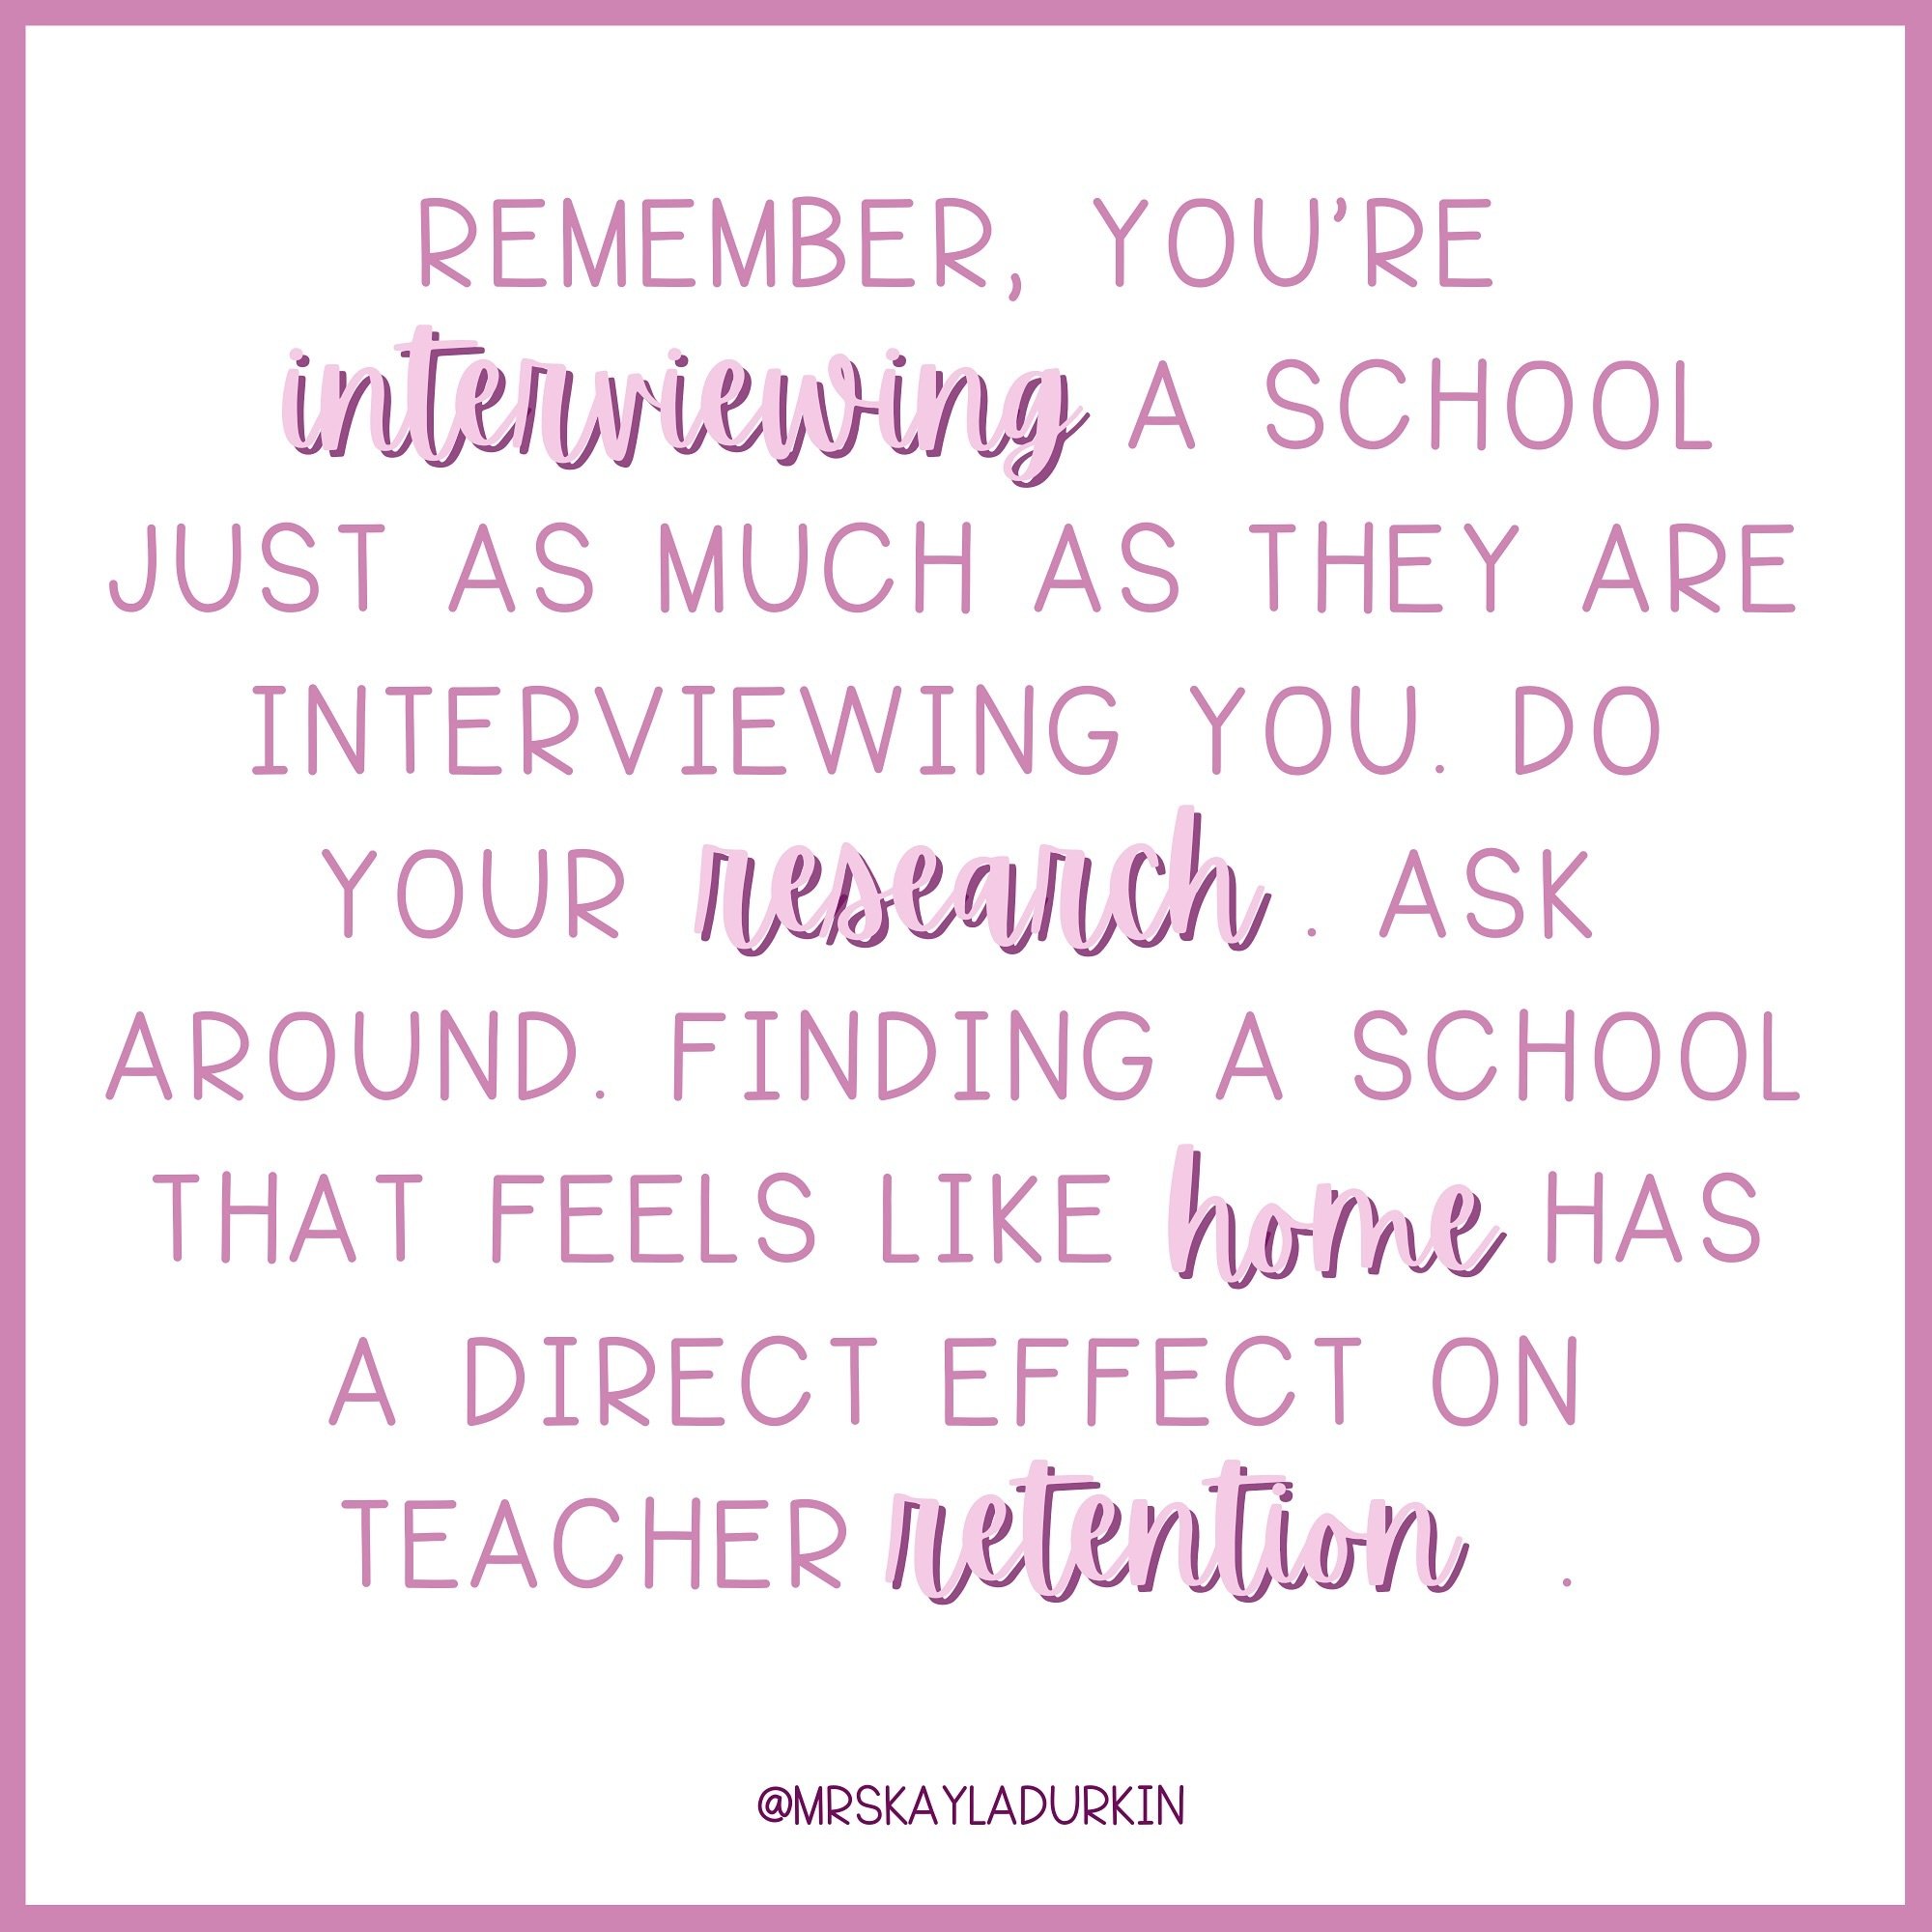 Always remember, you&rsquo;re interviewing a school just as much as they are interviewing you!

Before putting in those applications, make sure to do your research✍🏻

Finding a school that feels like home has a direct effect on teacher retention 🥰
